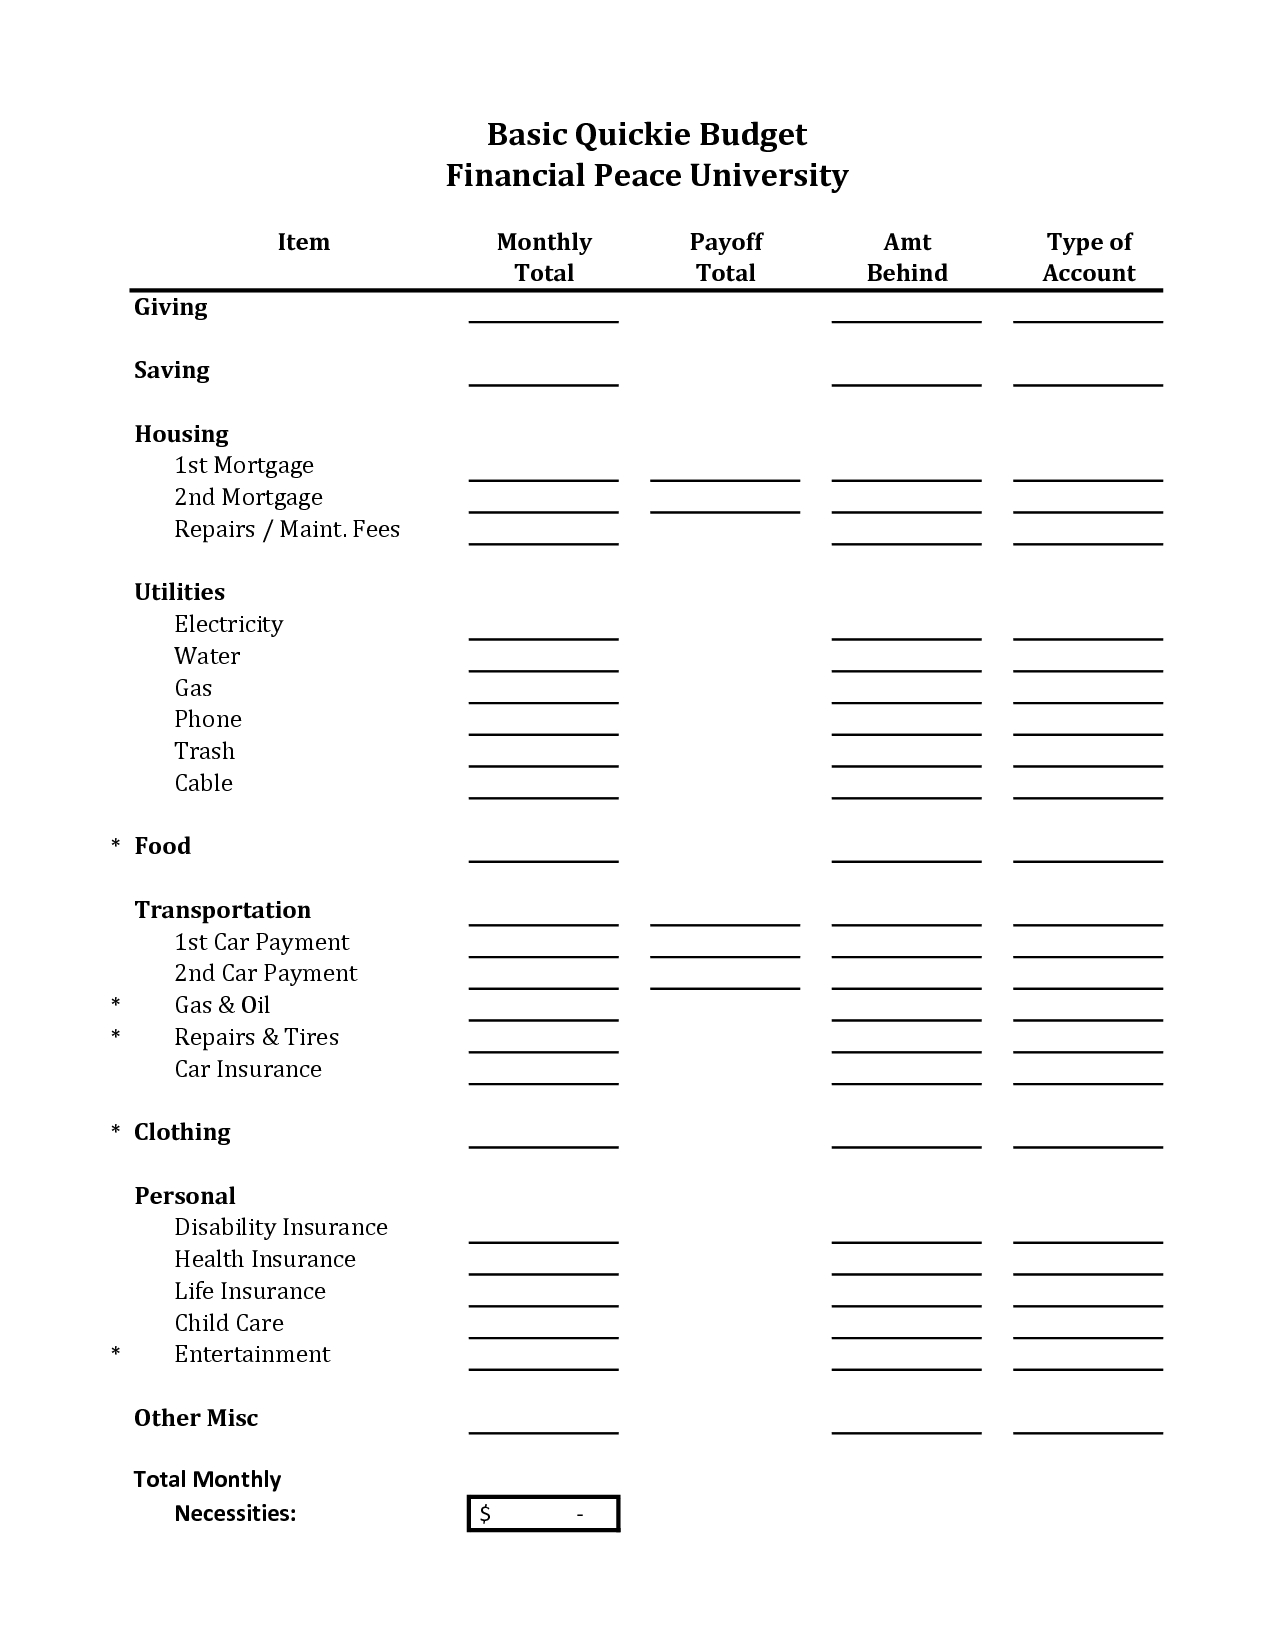 financial-peace-university-worksheets-db-excel